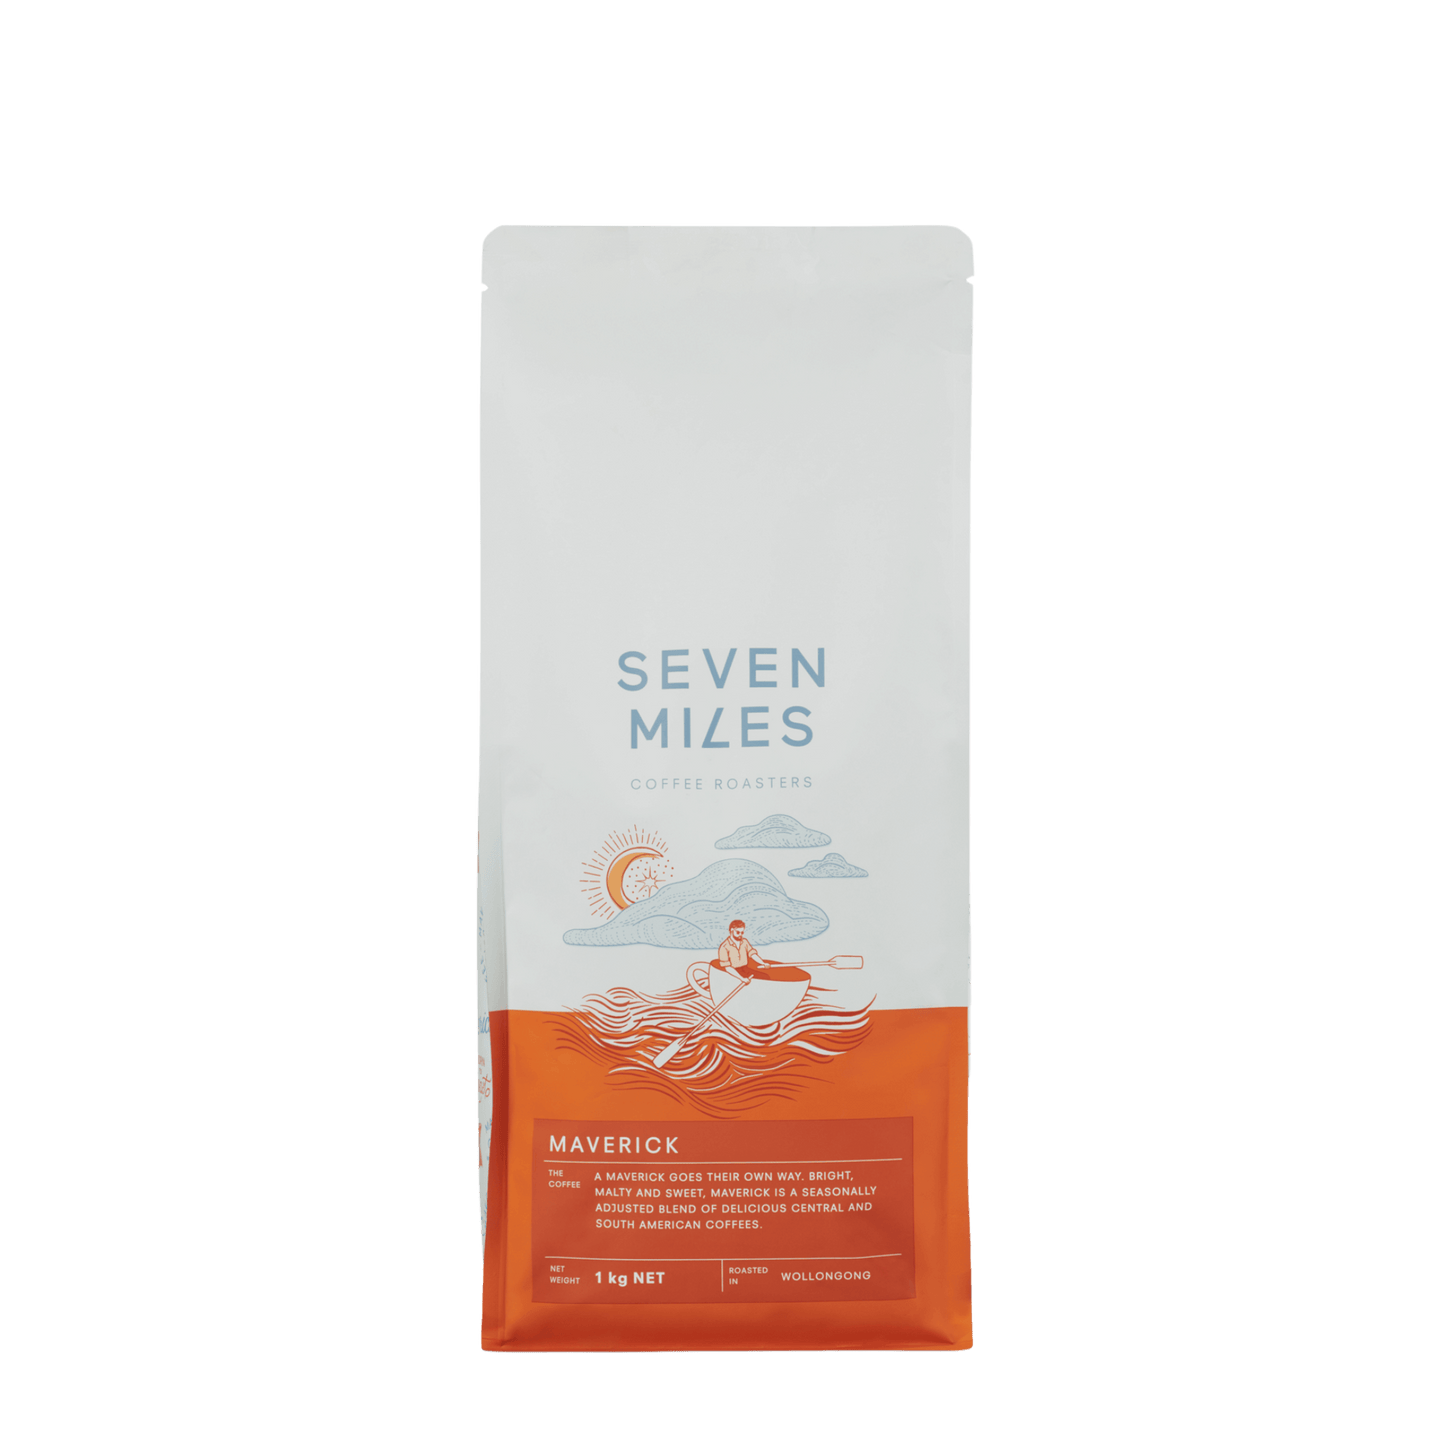 The Seven Miles Maverick Coffee 1kg Blend goes its own way. Bright, malty and sweet, this coffee works both as straight up espresso and for cutting through milk. A rich seasonally adjusted blend of Central and South American coffees, Maverick deftly chooses the path less travelled.